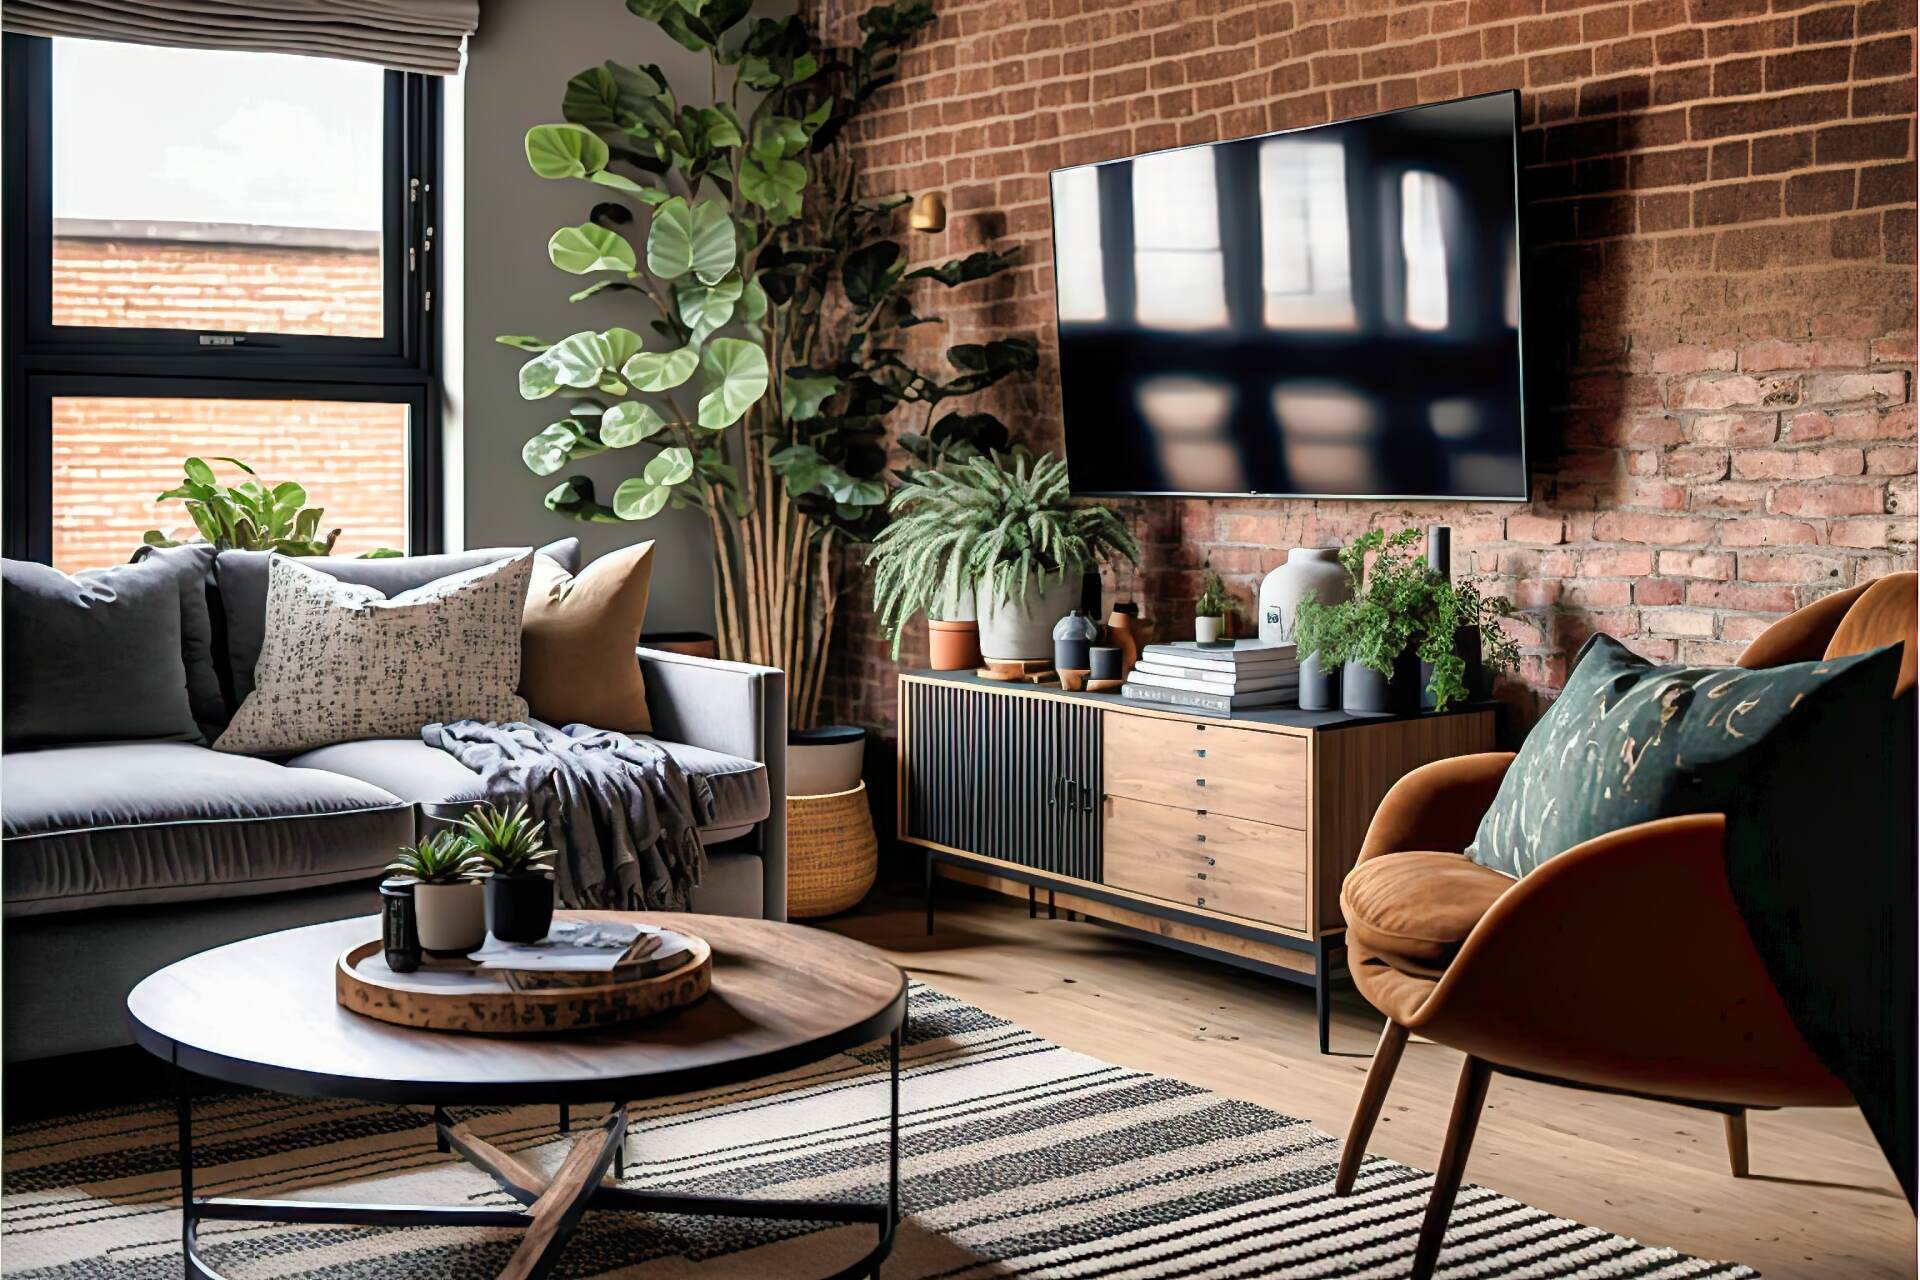 Picture A Living Room With Exposed Brick Walls And A Modern Industrial Feel. The Sofa Is A Contemporary Grey Velvet, With A Mid-Century Modern Coffee Table In Natural Wood With Black Metal Legs. A Round Side Table In A Darker Wood Is A Great Contrast, And Provides A Spot For A Tv. A Grey And Black Patterned Rug Grounds The Look And Pops Against The Brick Walls. A Wall Of Shelving Is Perfect For Displaying Books And Other Items.